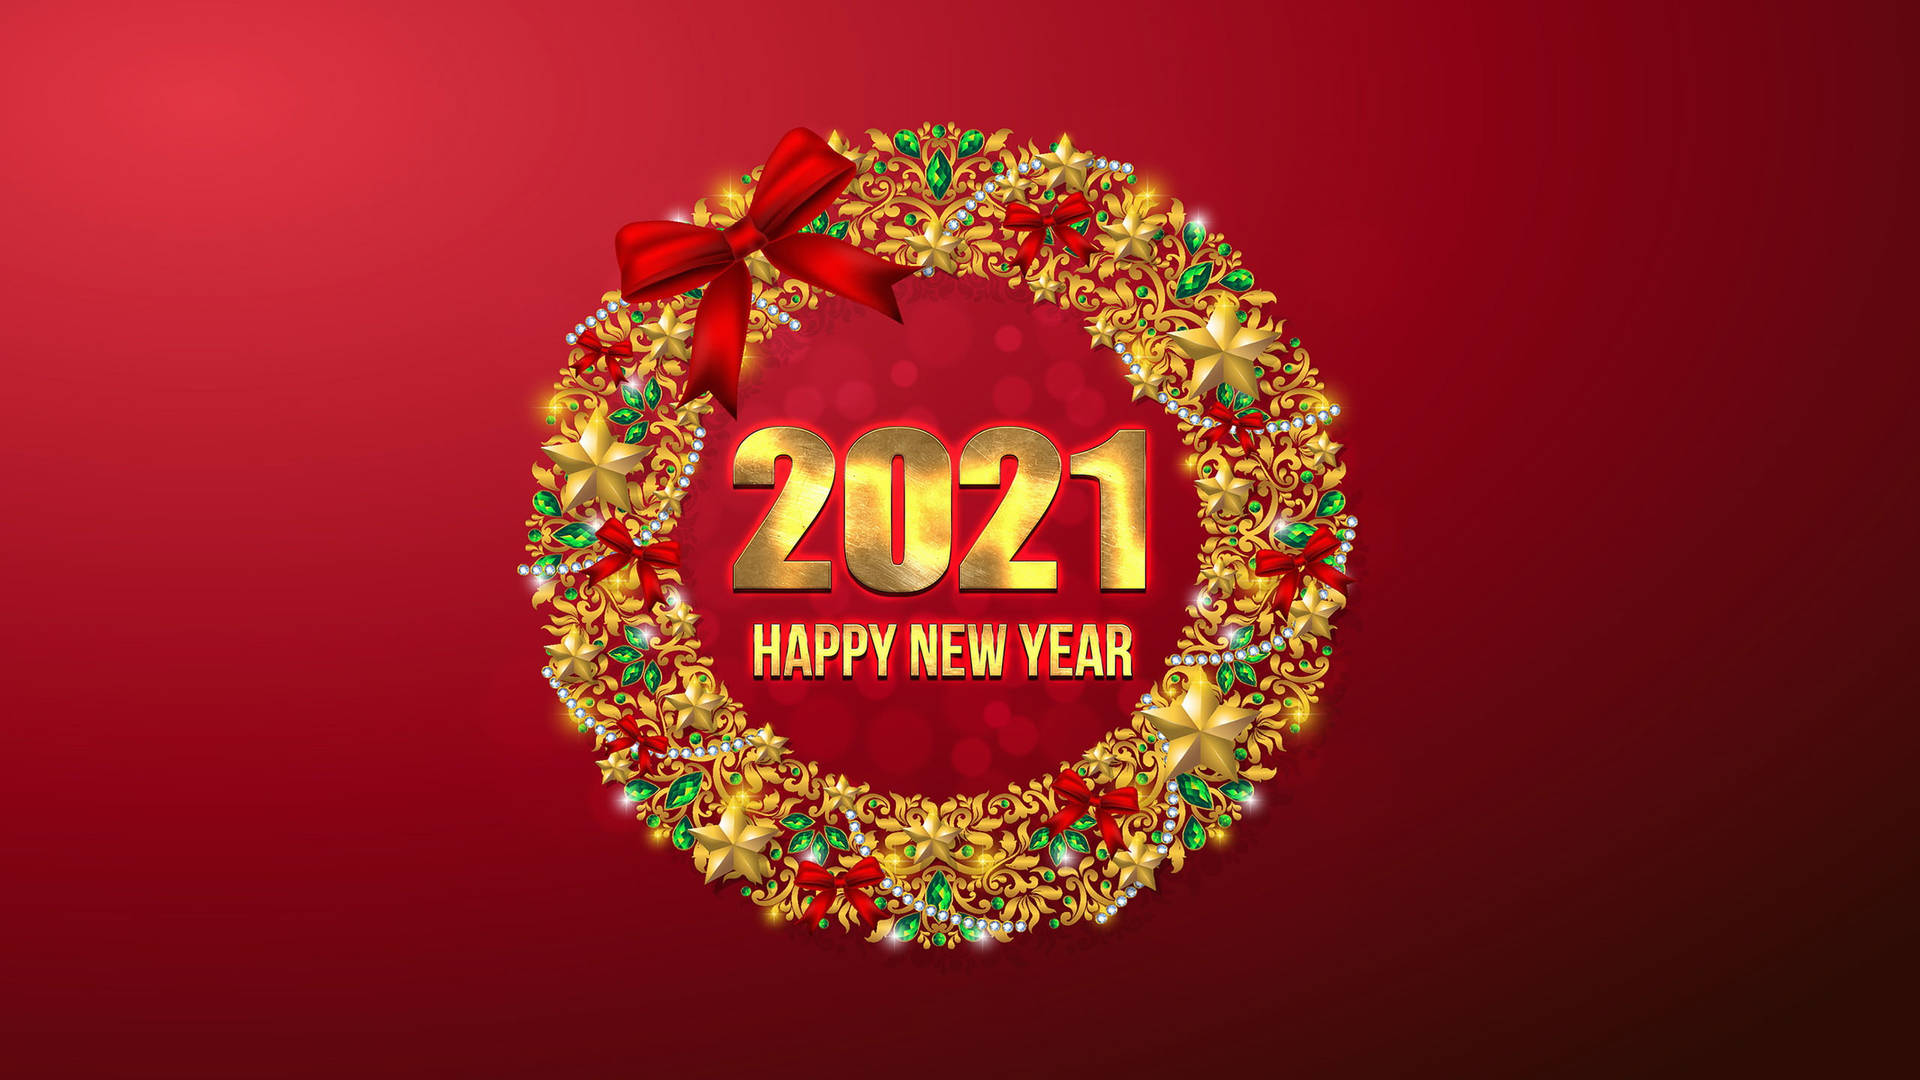 Happy New Year 2021 Greeting With Christmas Garlands